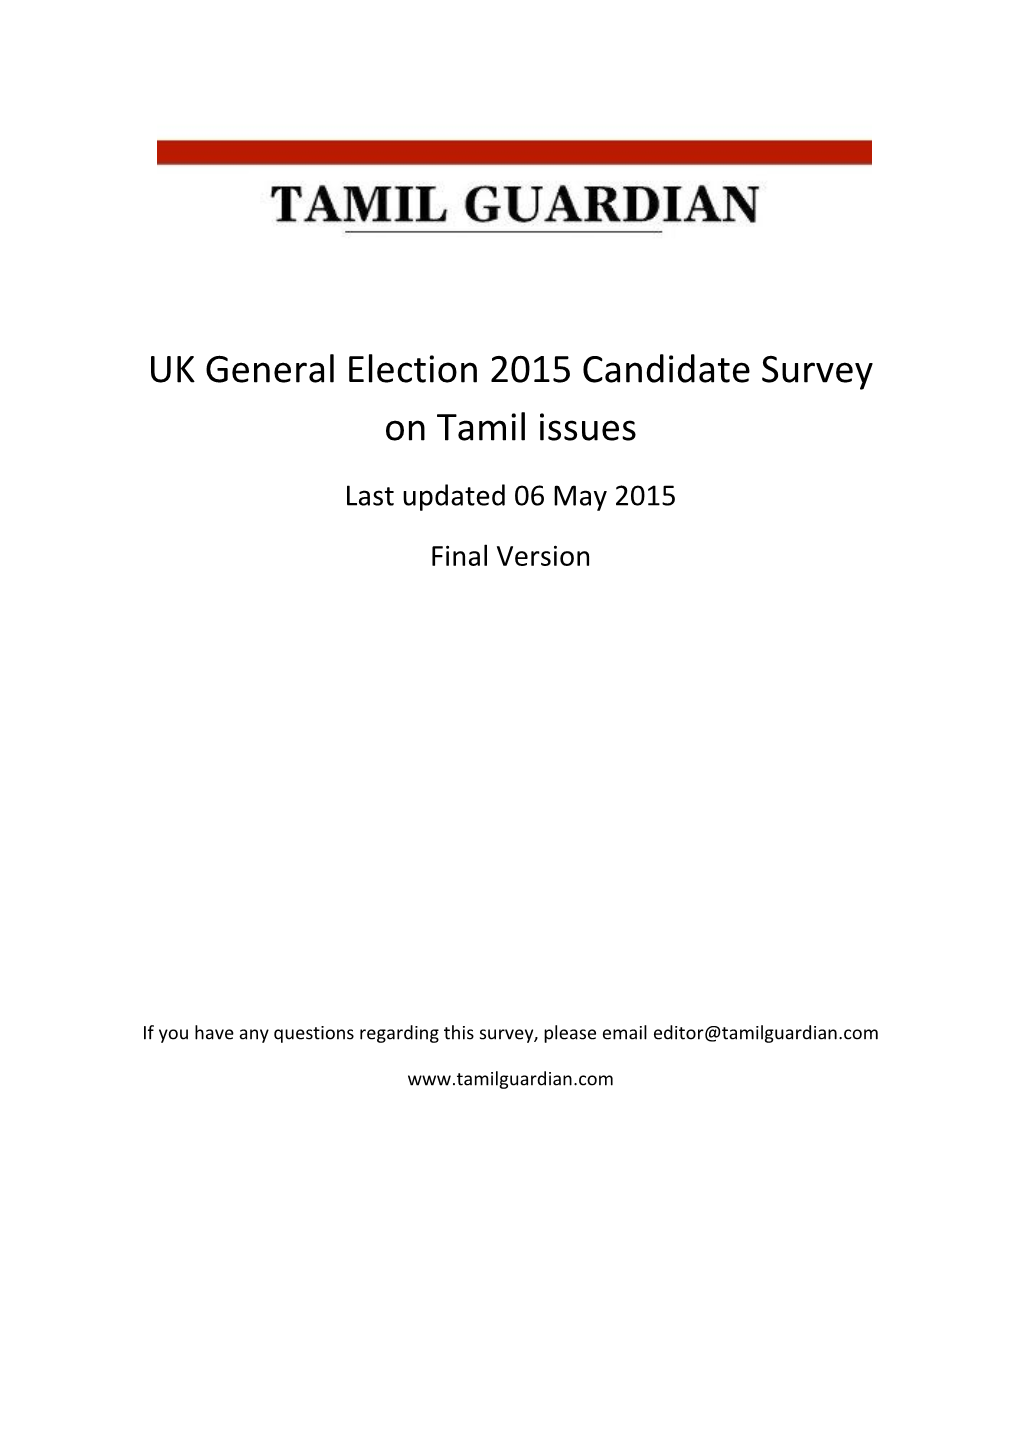 UK General Election 2015 Candidate Survey on Tamil Issues